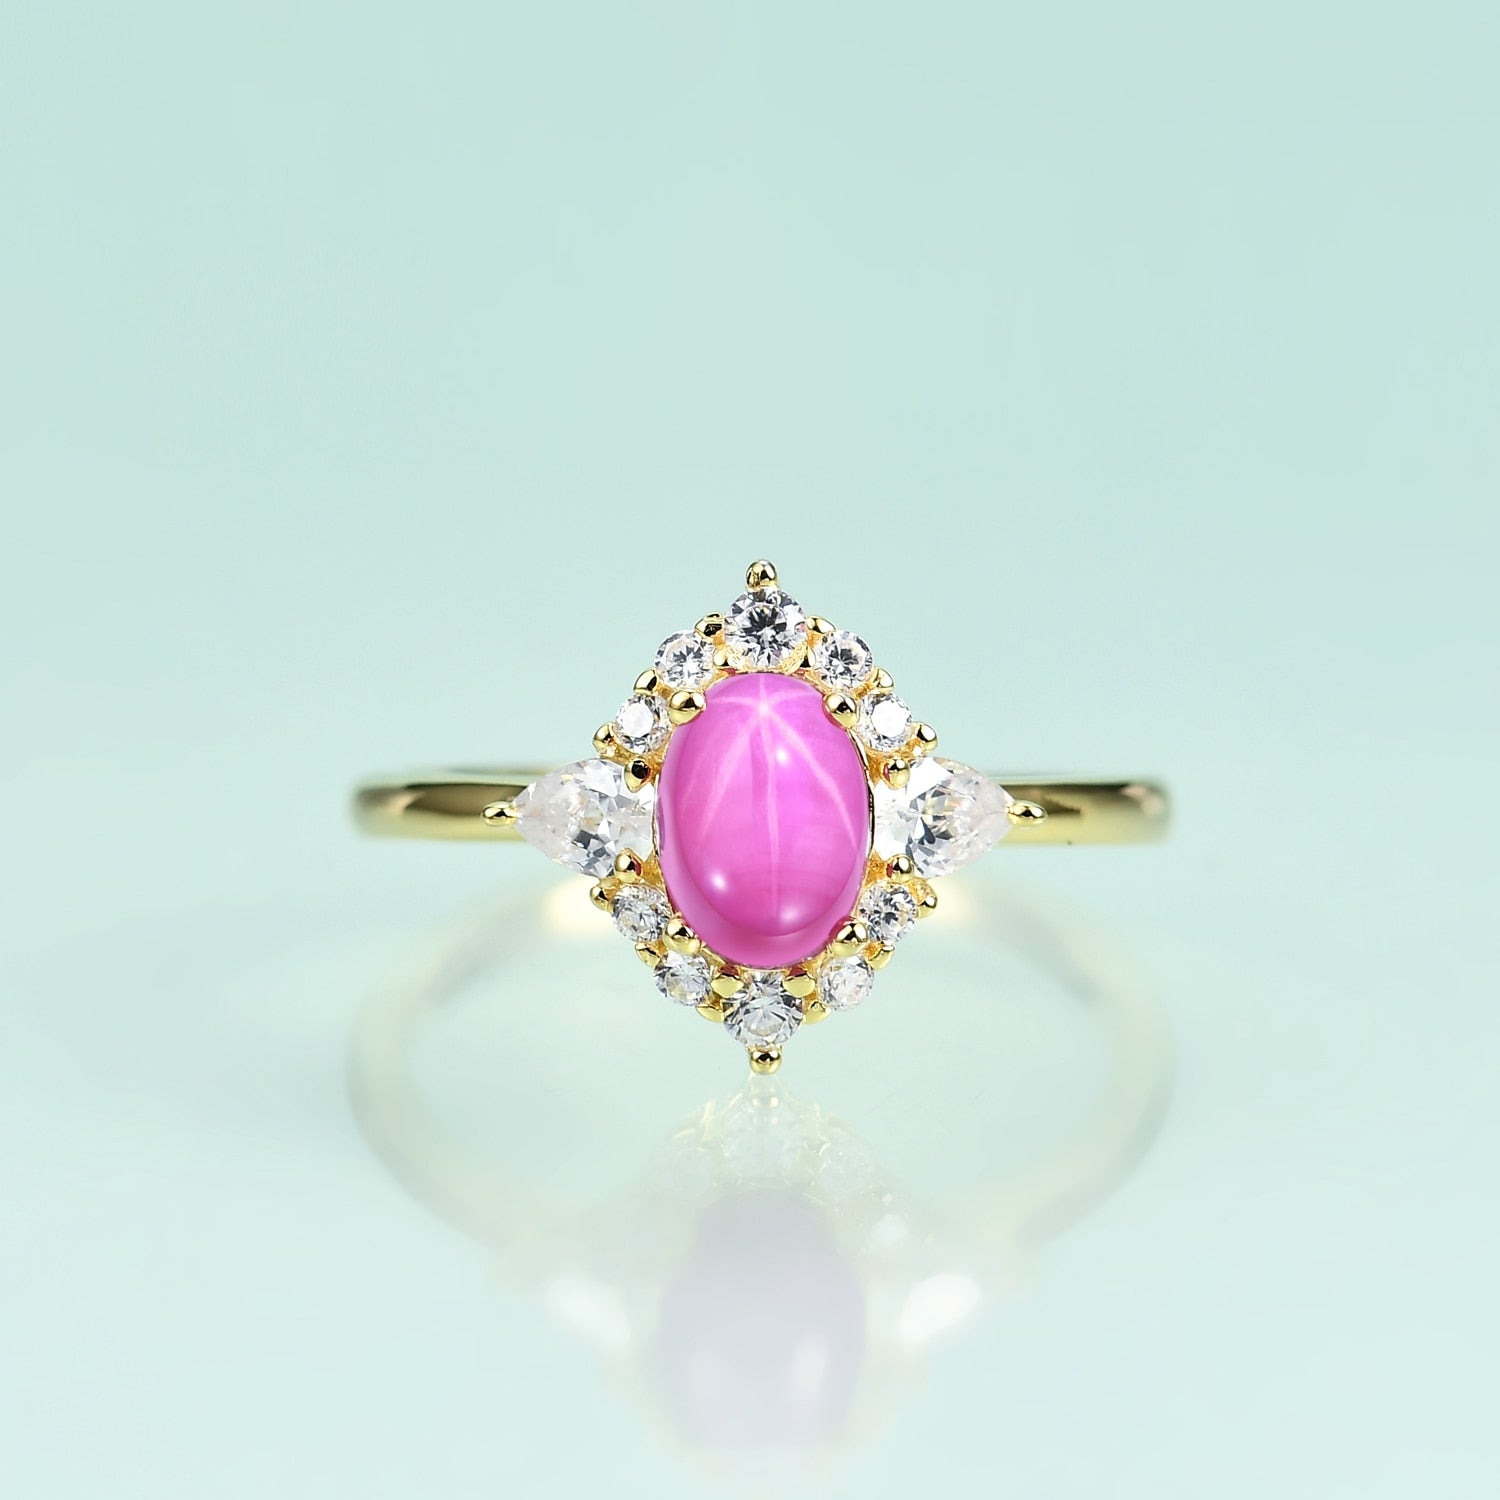 Classic 14K White Gold Three Stone Princess Pink Sapphire Emerald Solitaire Engagement  Ring R500-14KWGEMPS | Art Masters Jewelry